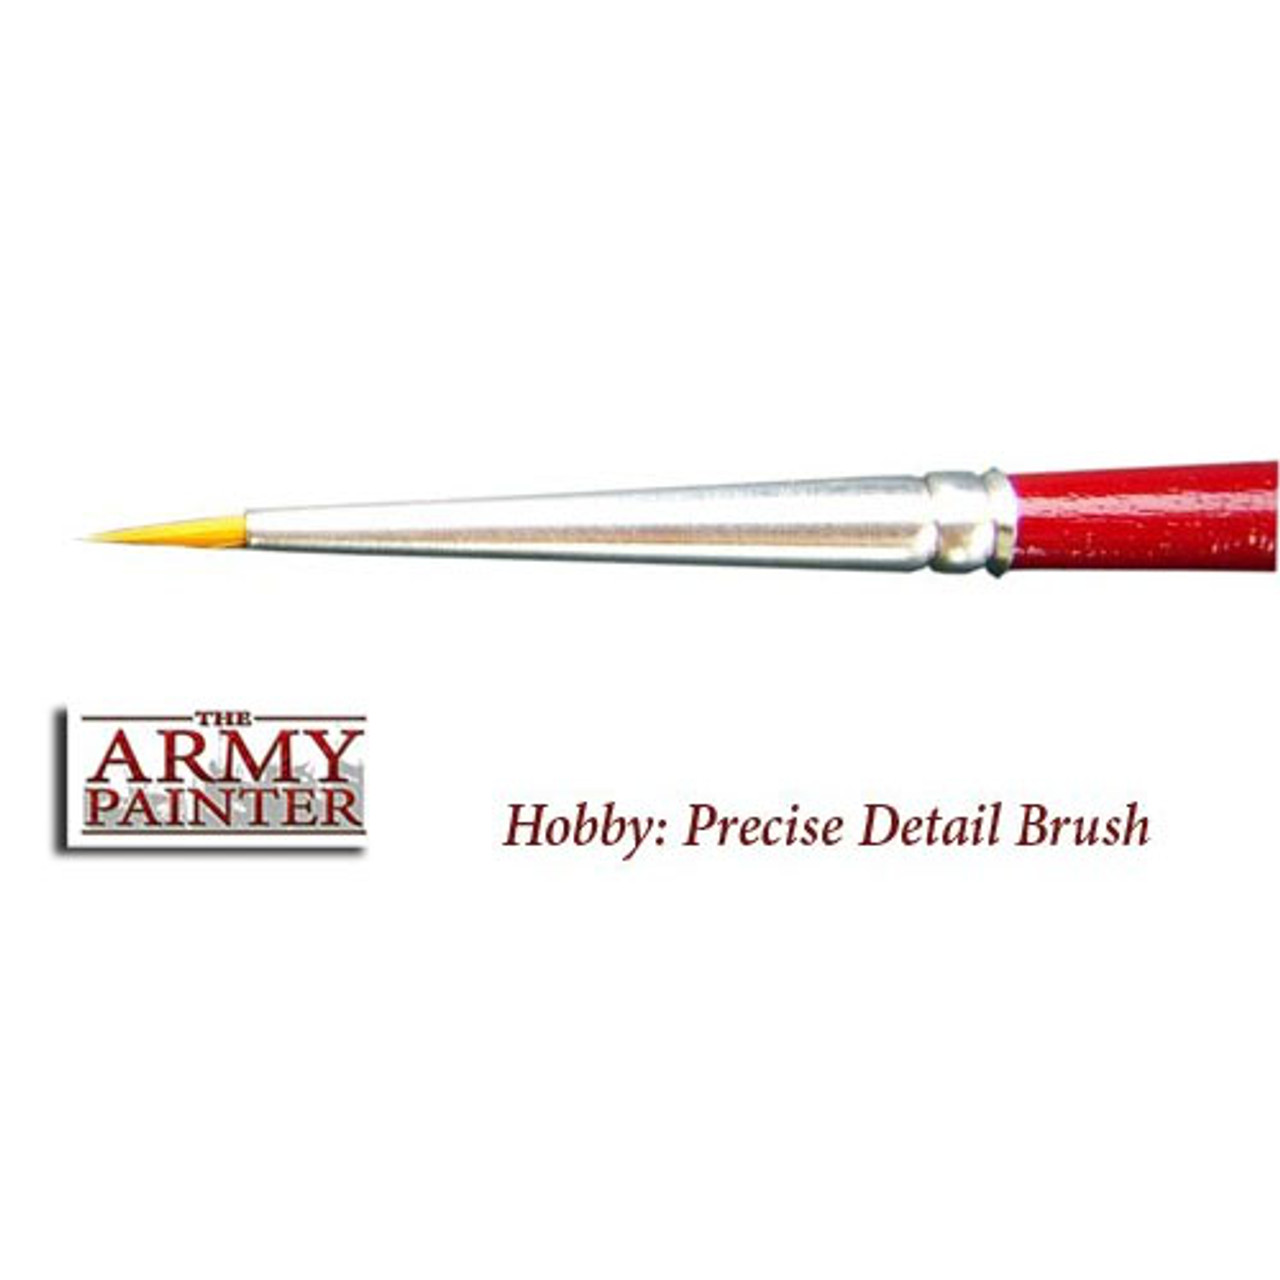 The Army Painter Hobby: Precise Detail - Hobby Brush with